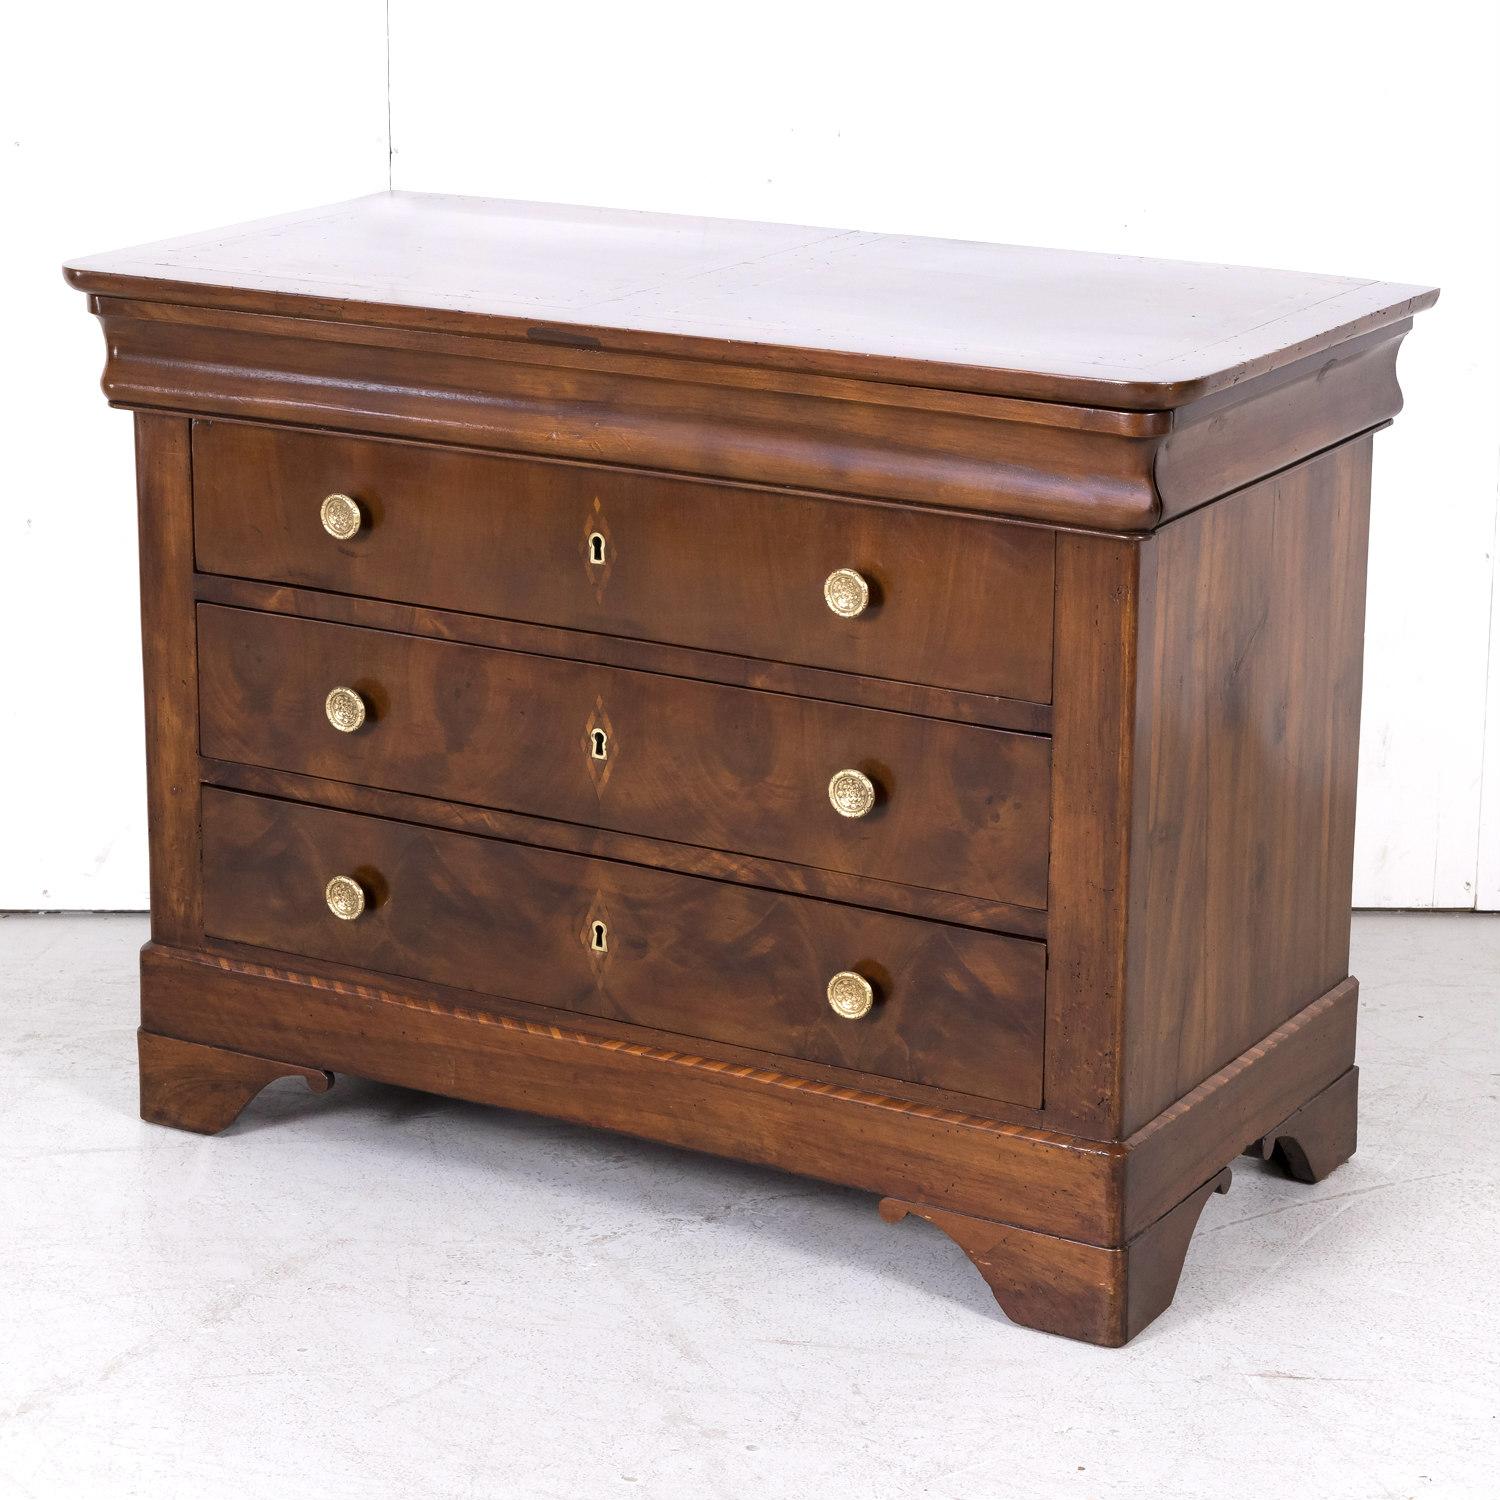 Mid-19th Century 19th Century French Period Louis Philippe Walnut and Fruitwood Parquetry Commode